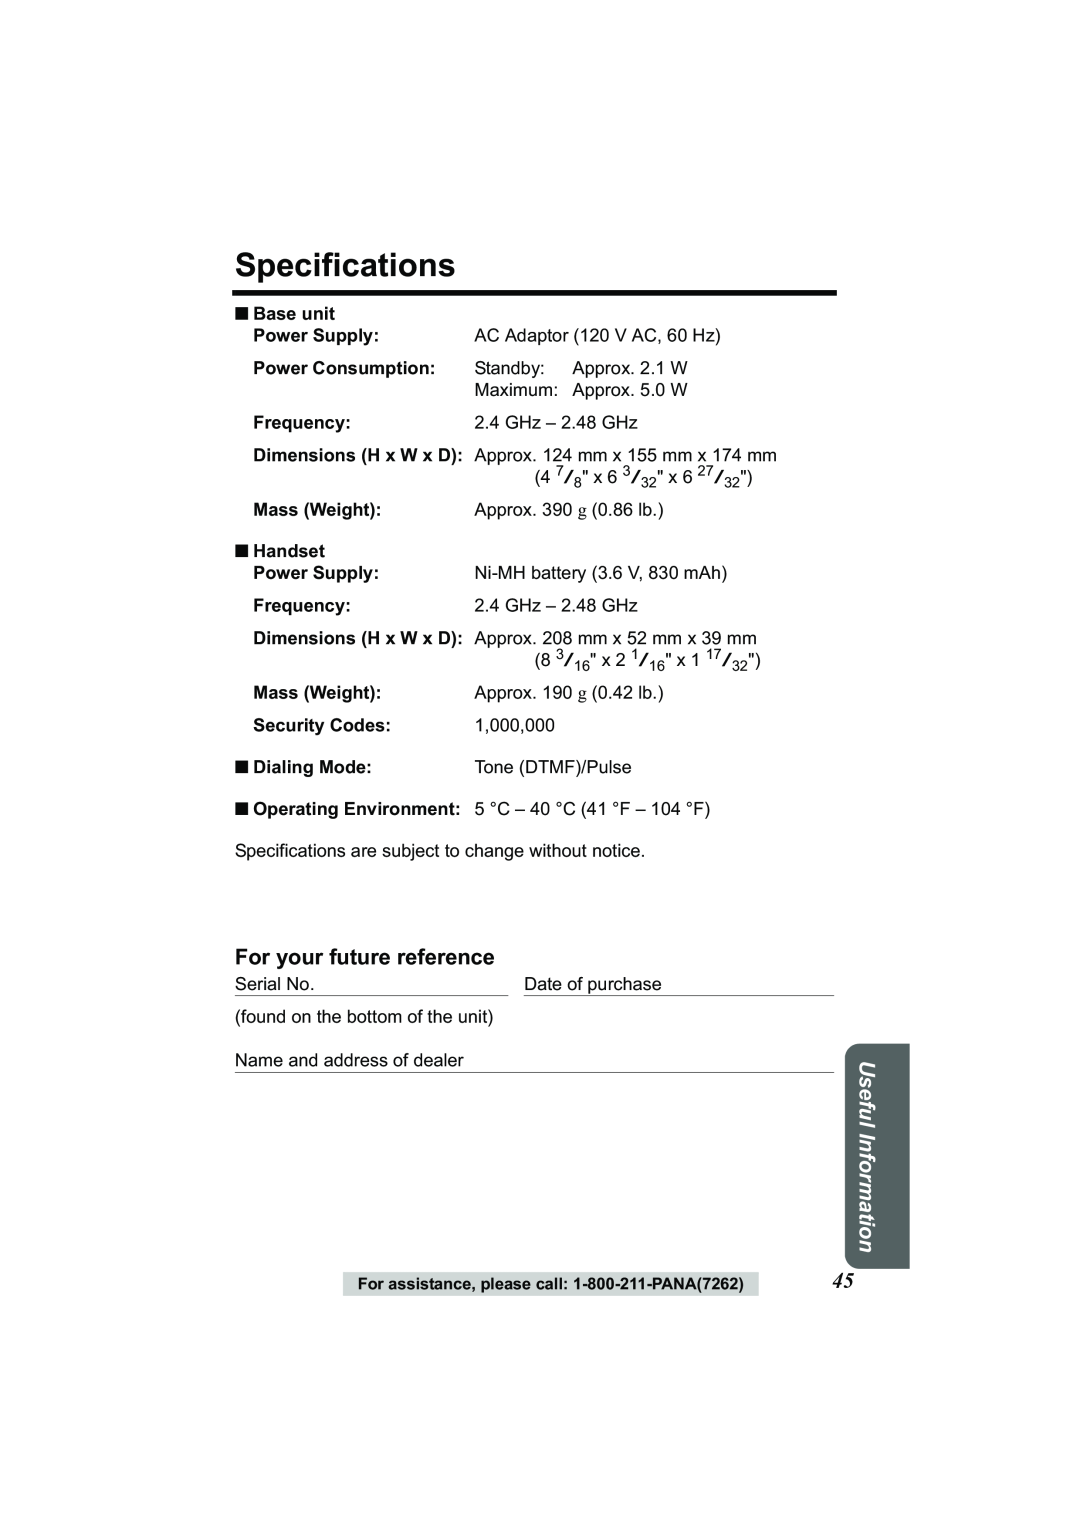 Panasonic Acr14CF.tmp manual Specifications, For your future reference, Useful Information 